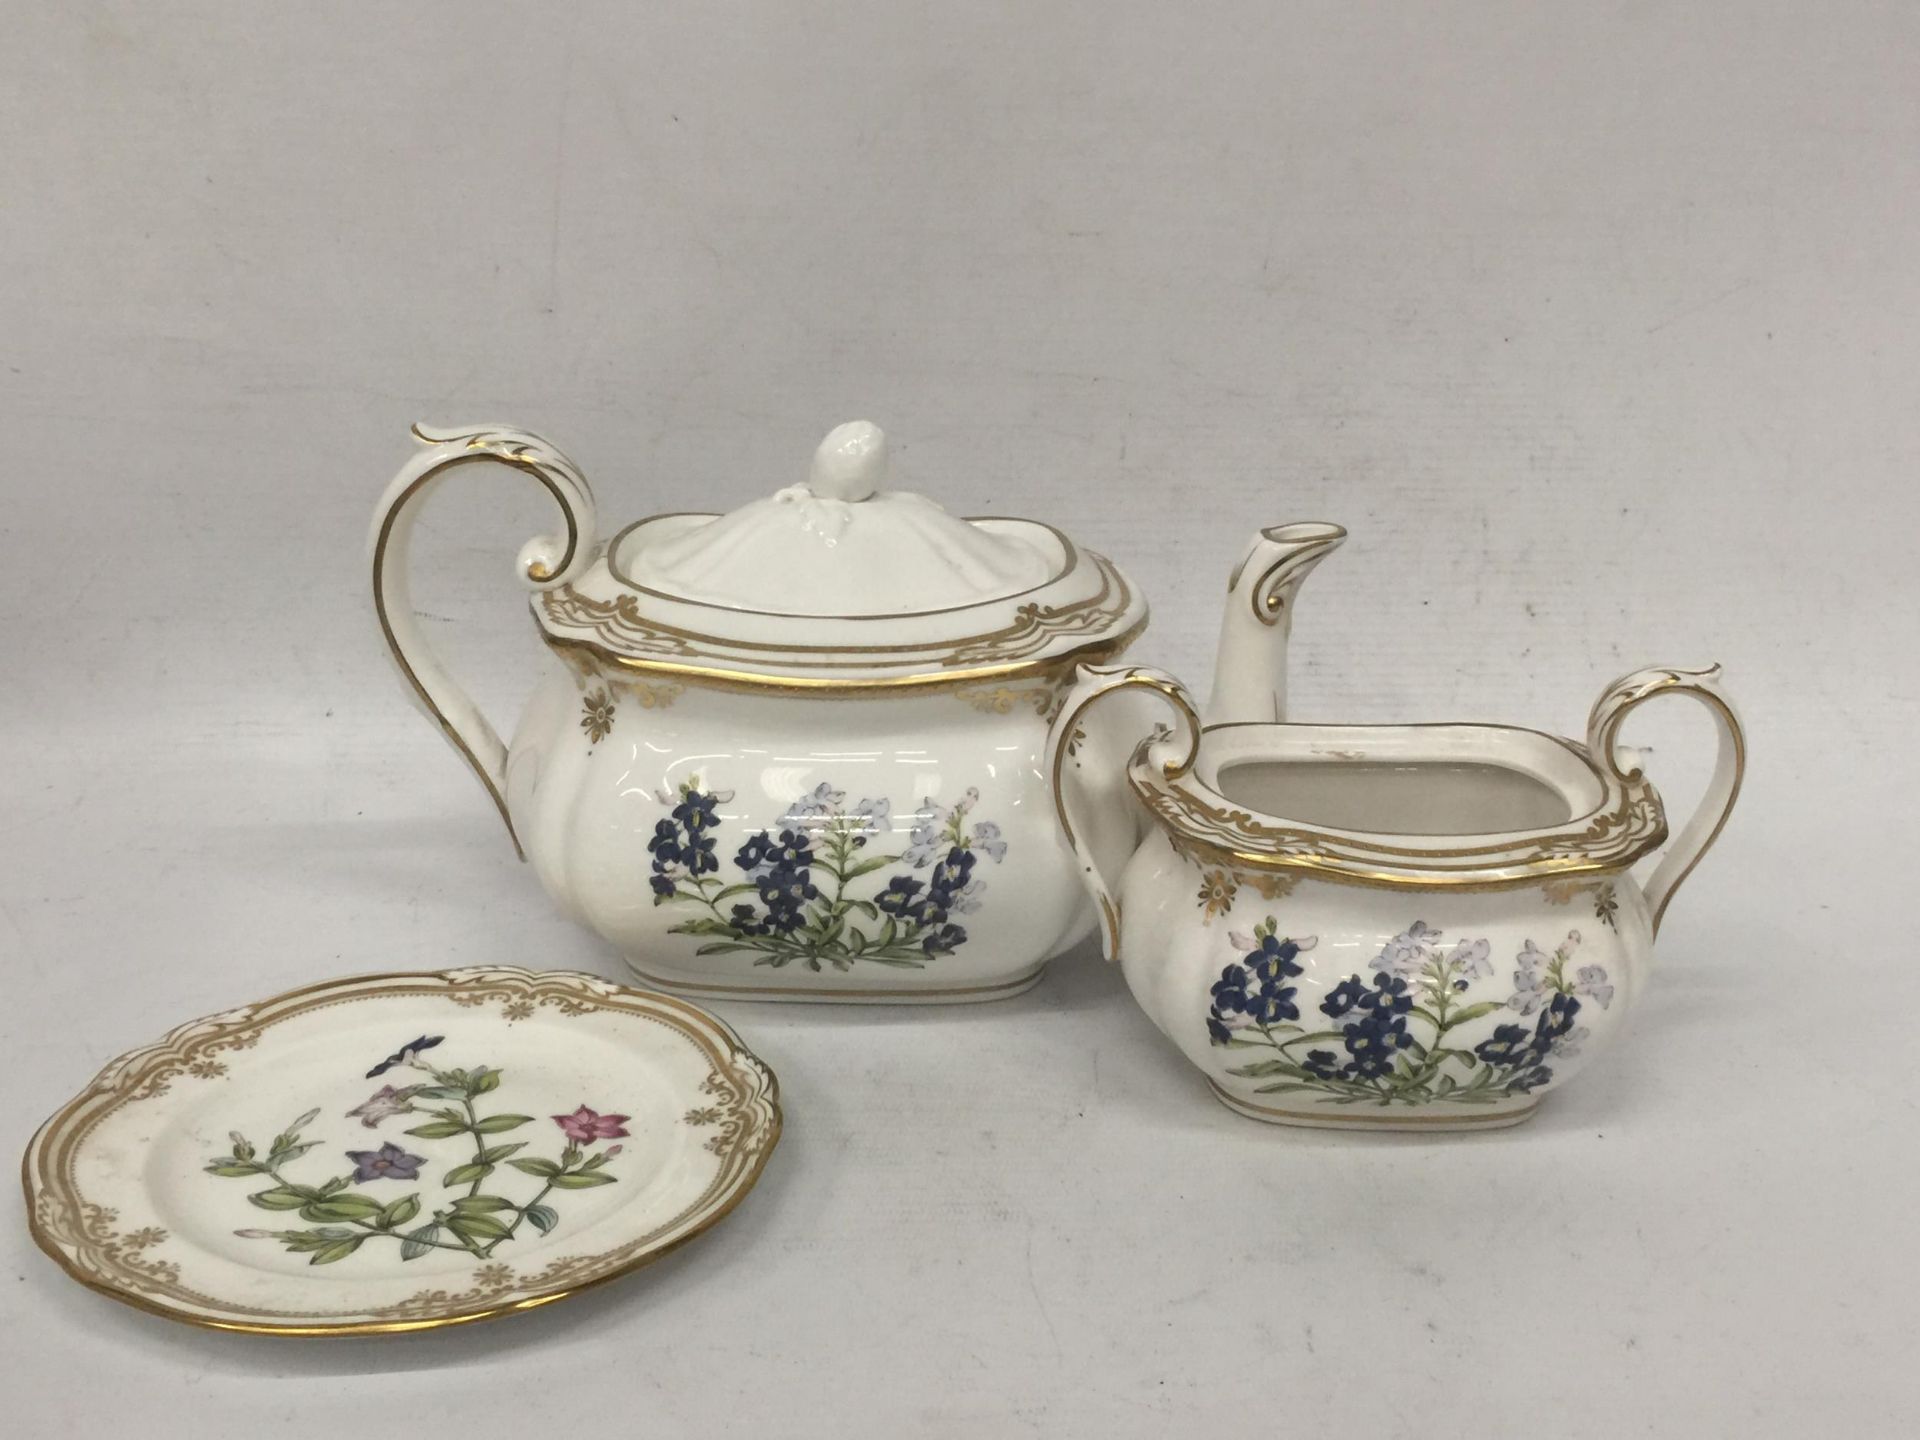 A COLLECTION OF SPODE CANTERBURY AND STAFFORD DLOWERS DINNER SERVICE ITEMS - Image 7 of 8